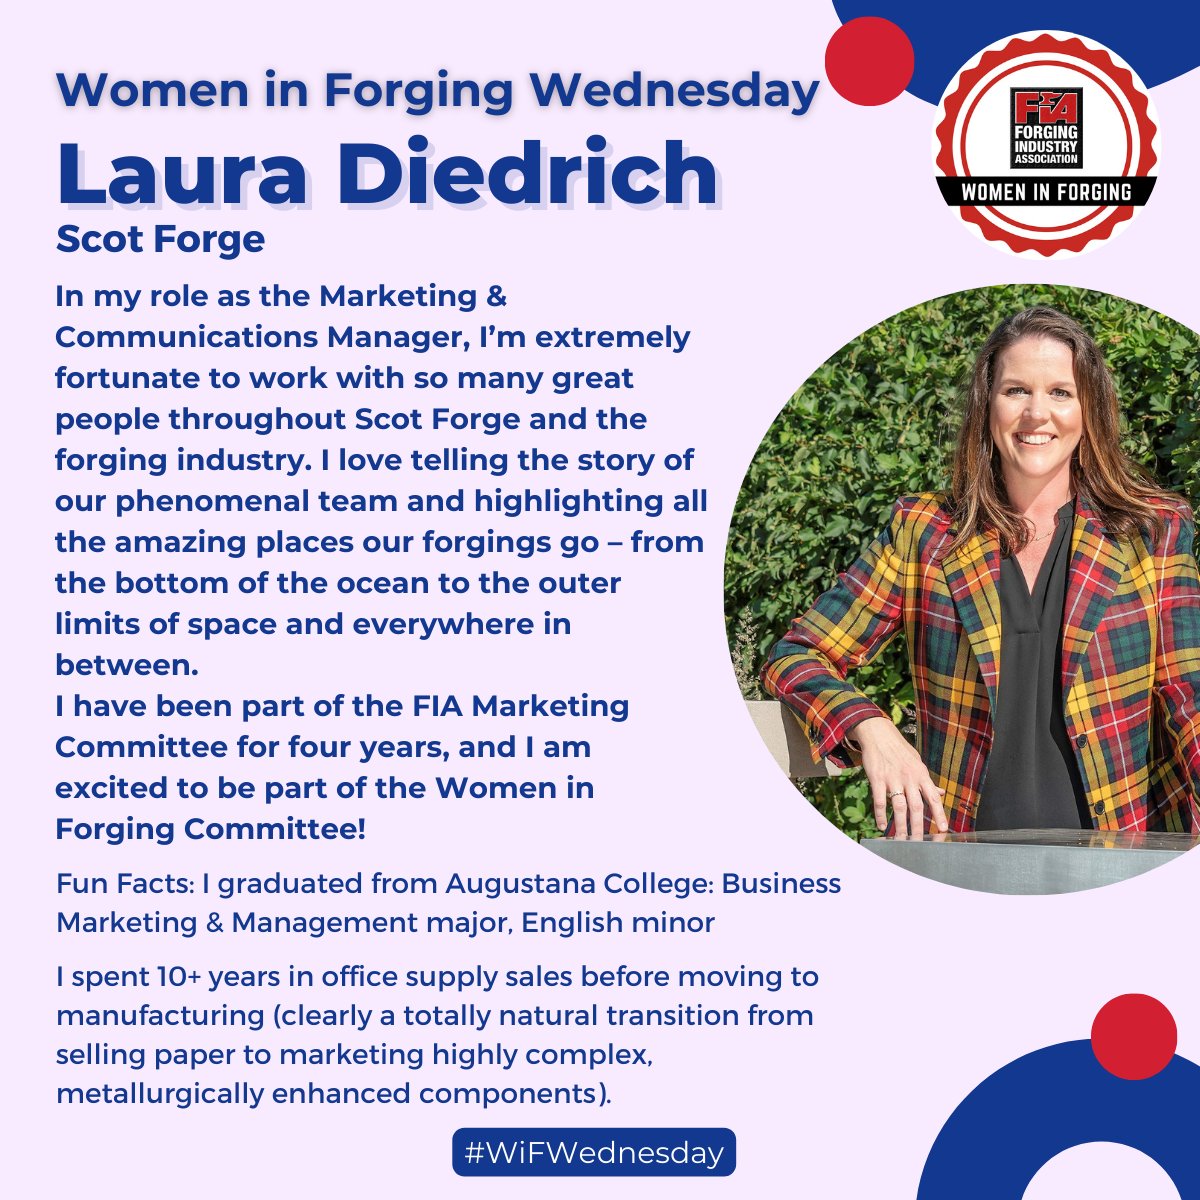 Happy #WiFWednesday! This week we would like to highlight Laura Diedrich @ScotForge.